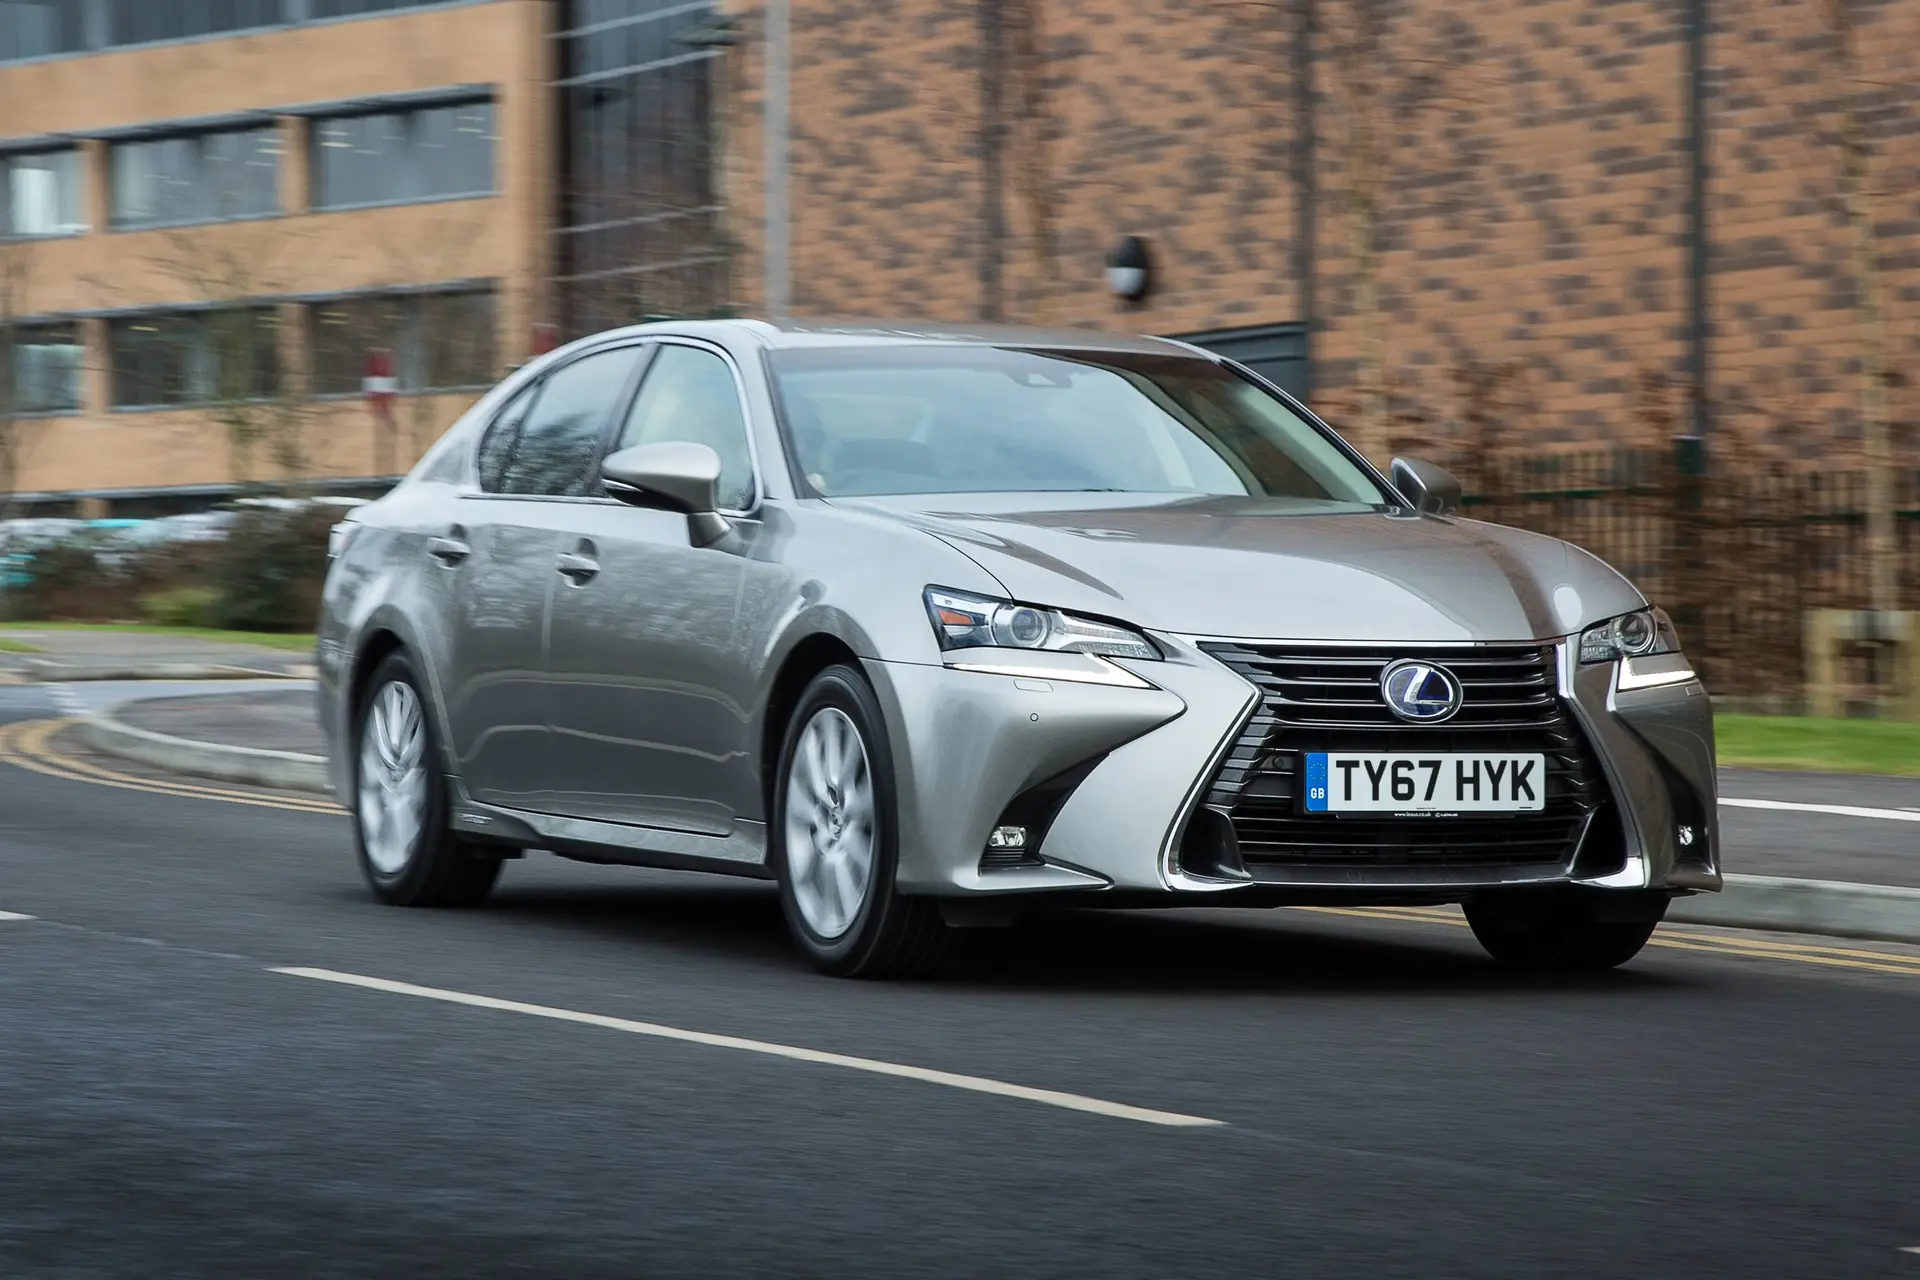 Lexus GS (2012-2018) Review: exterior front three quarter photo of the Lexus GS on the road